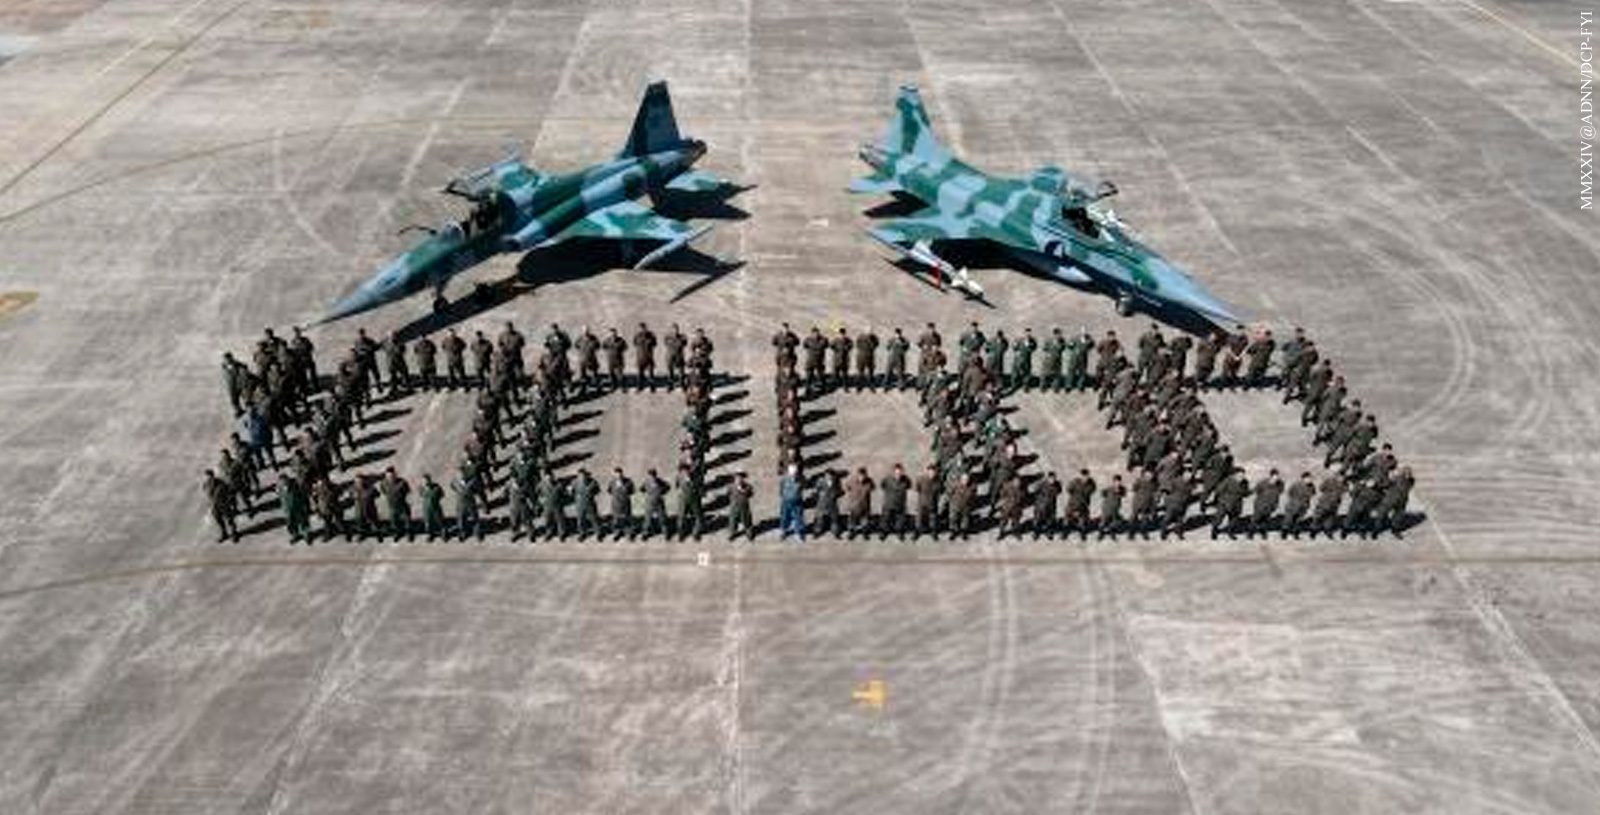 Squadron Pampa reaches milestone of 100,000 flight hours in F-5 fighter aircraft